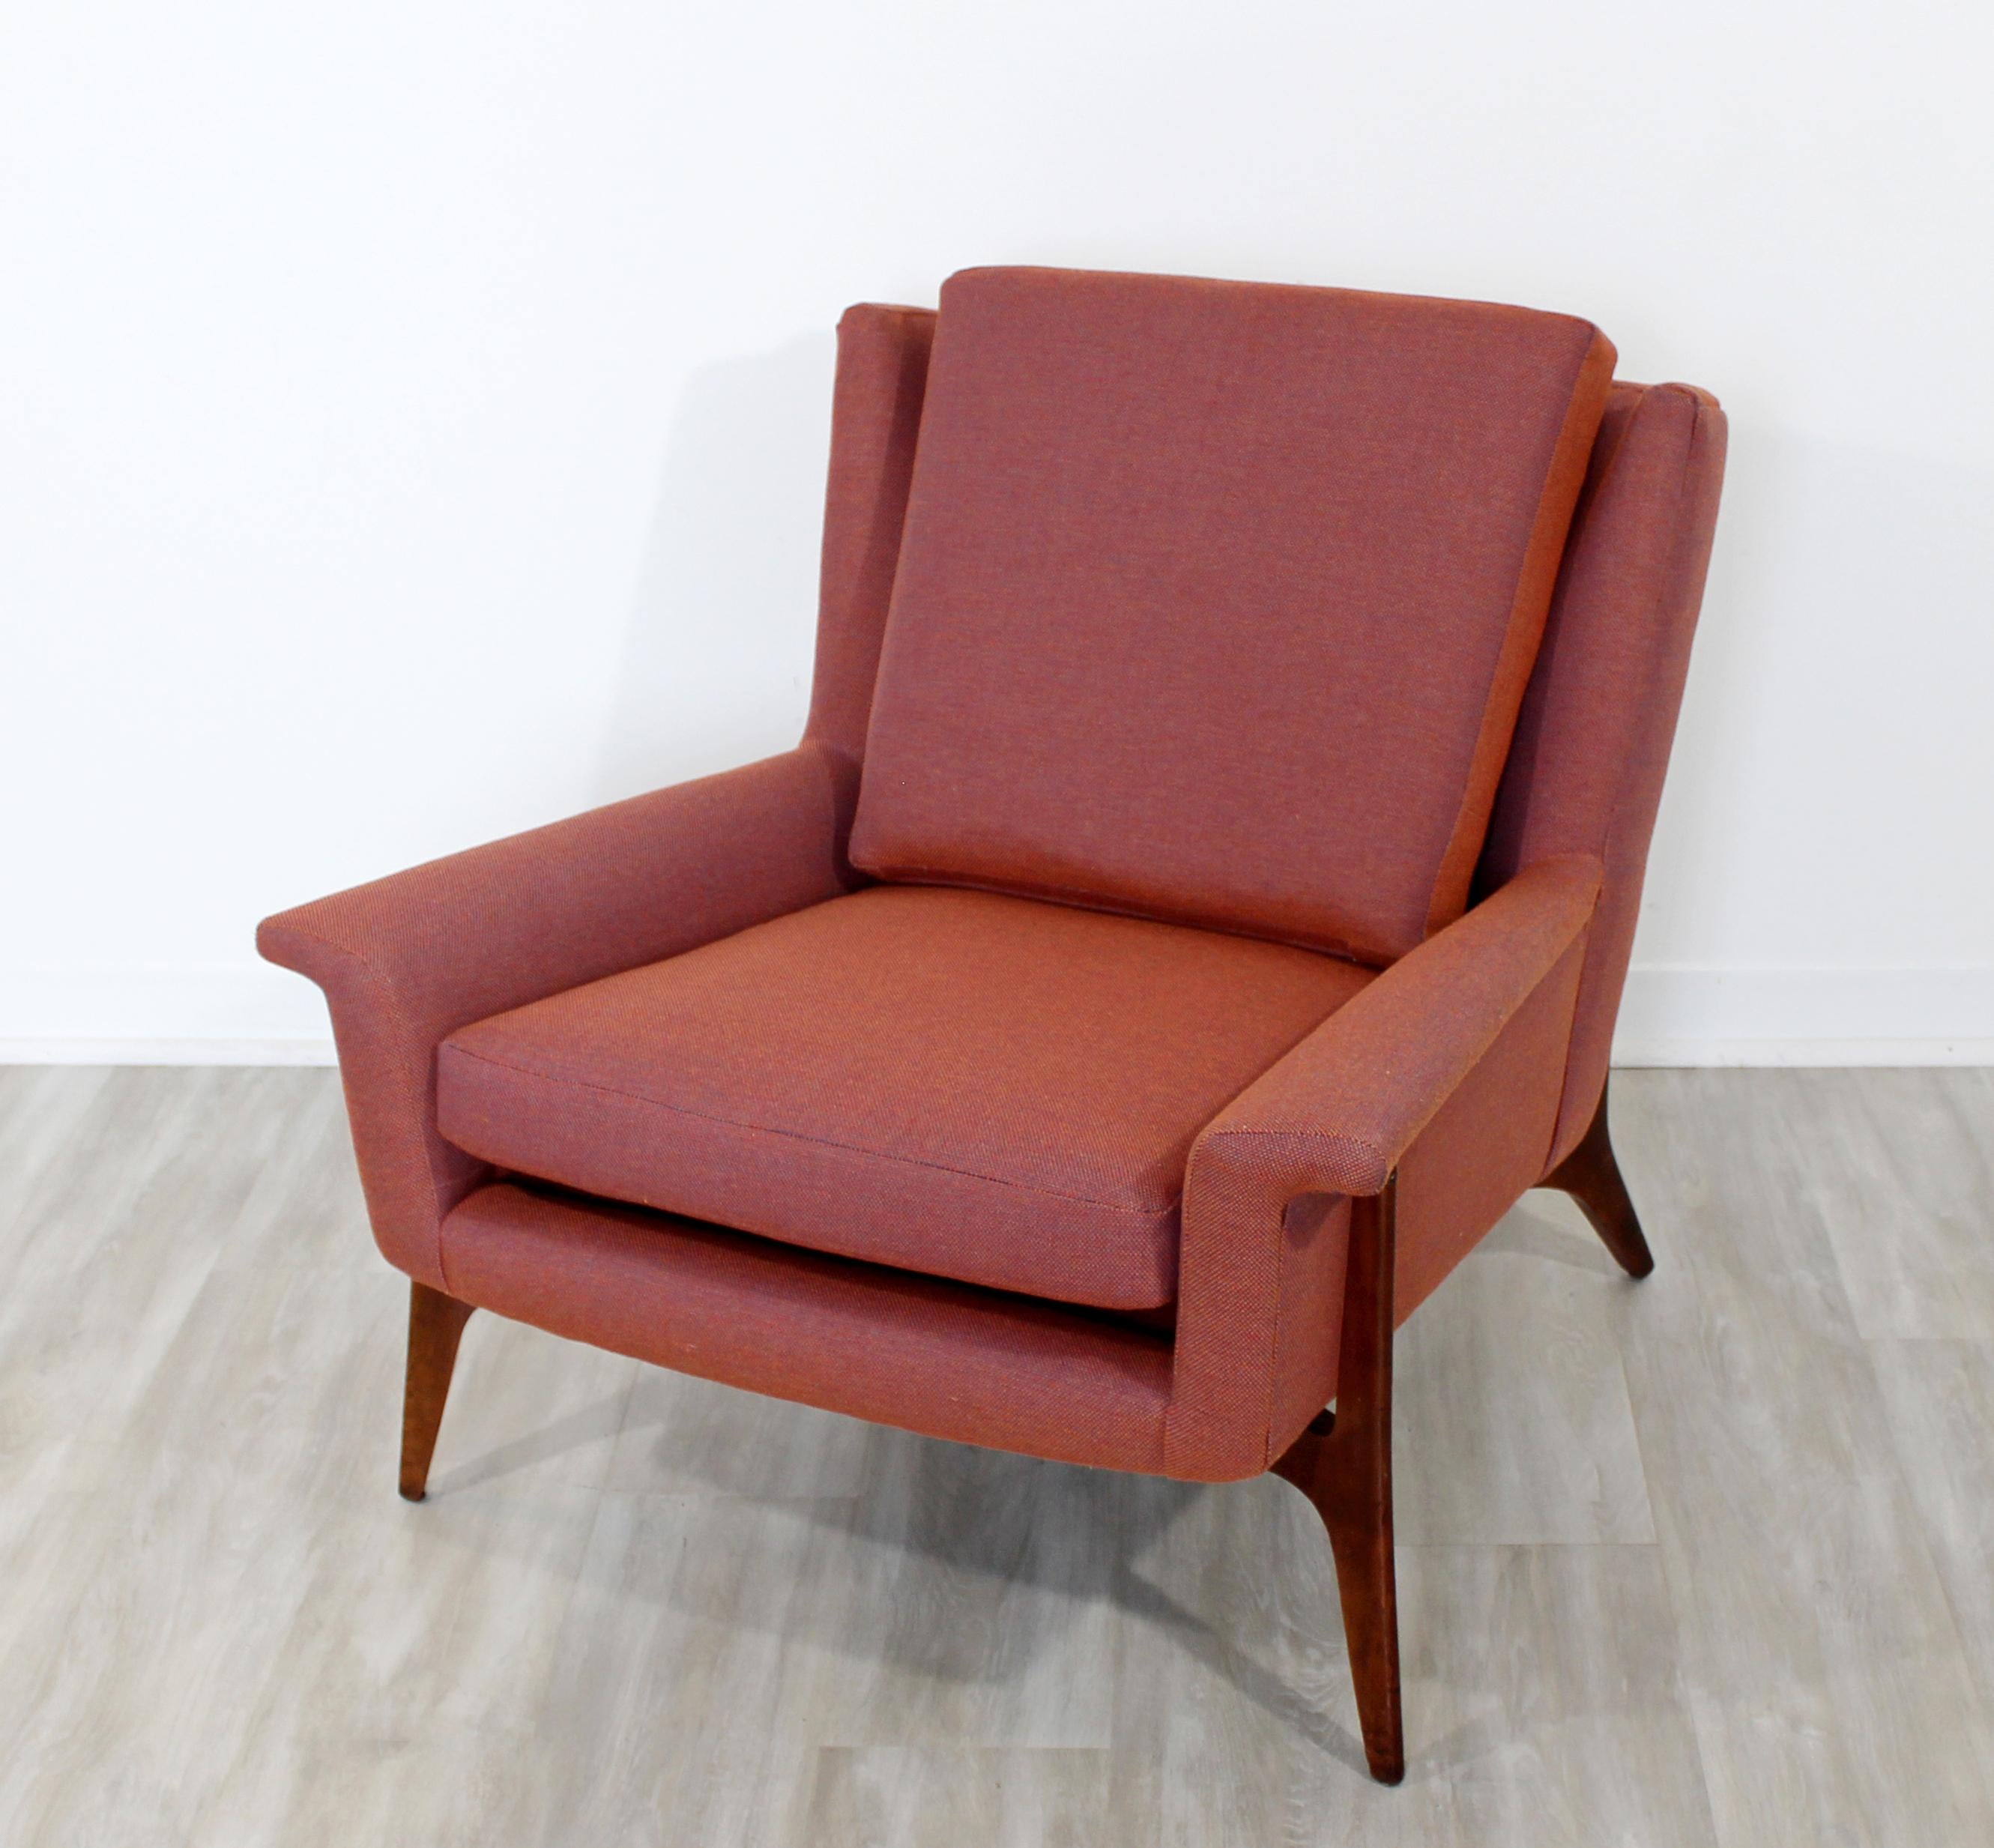 American Mid-Century Modern Early Sculptural Wood Lounge Armchair, 1950s